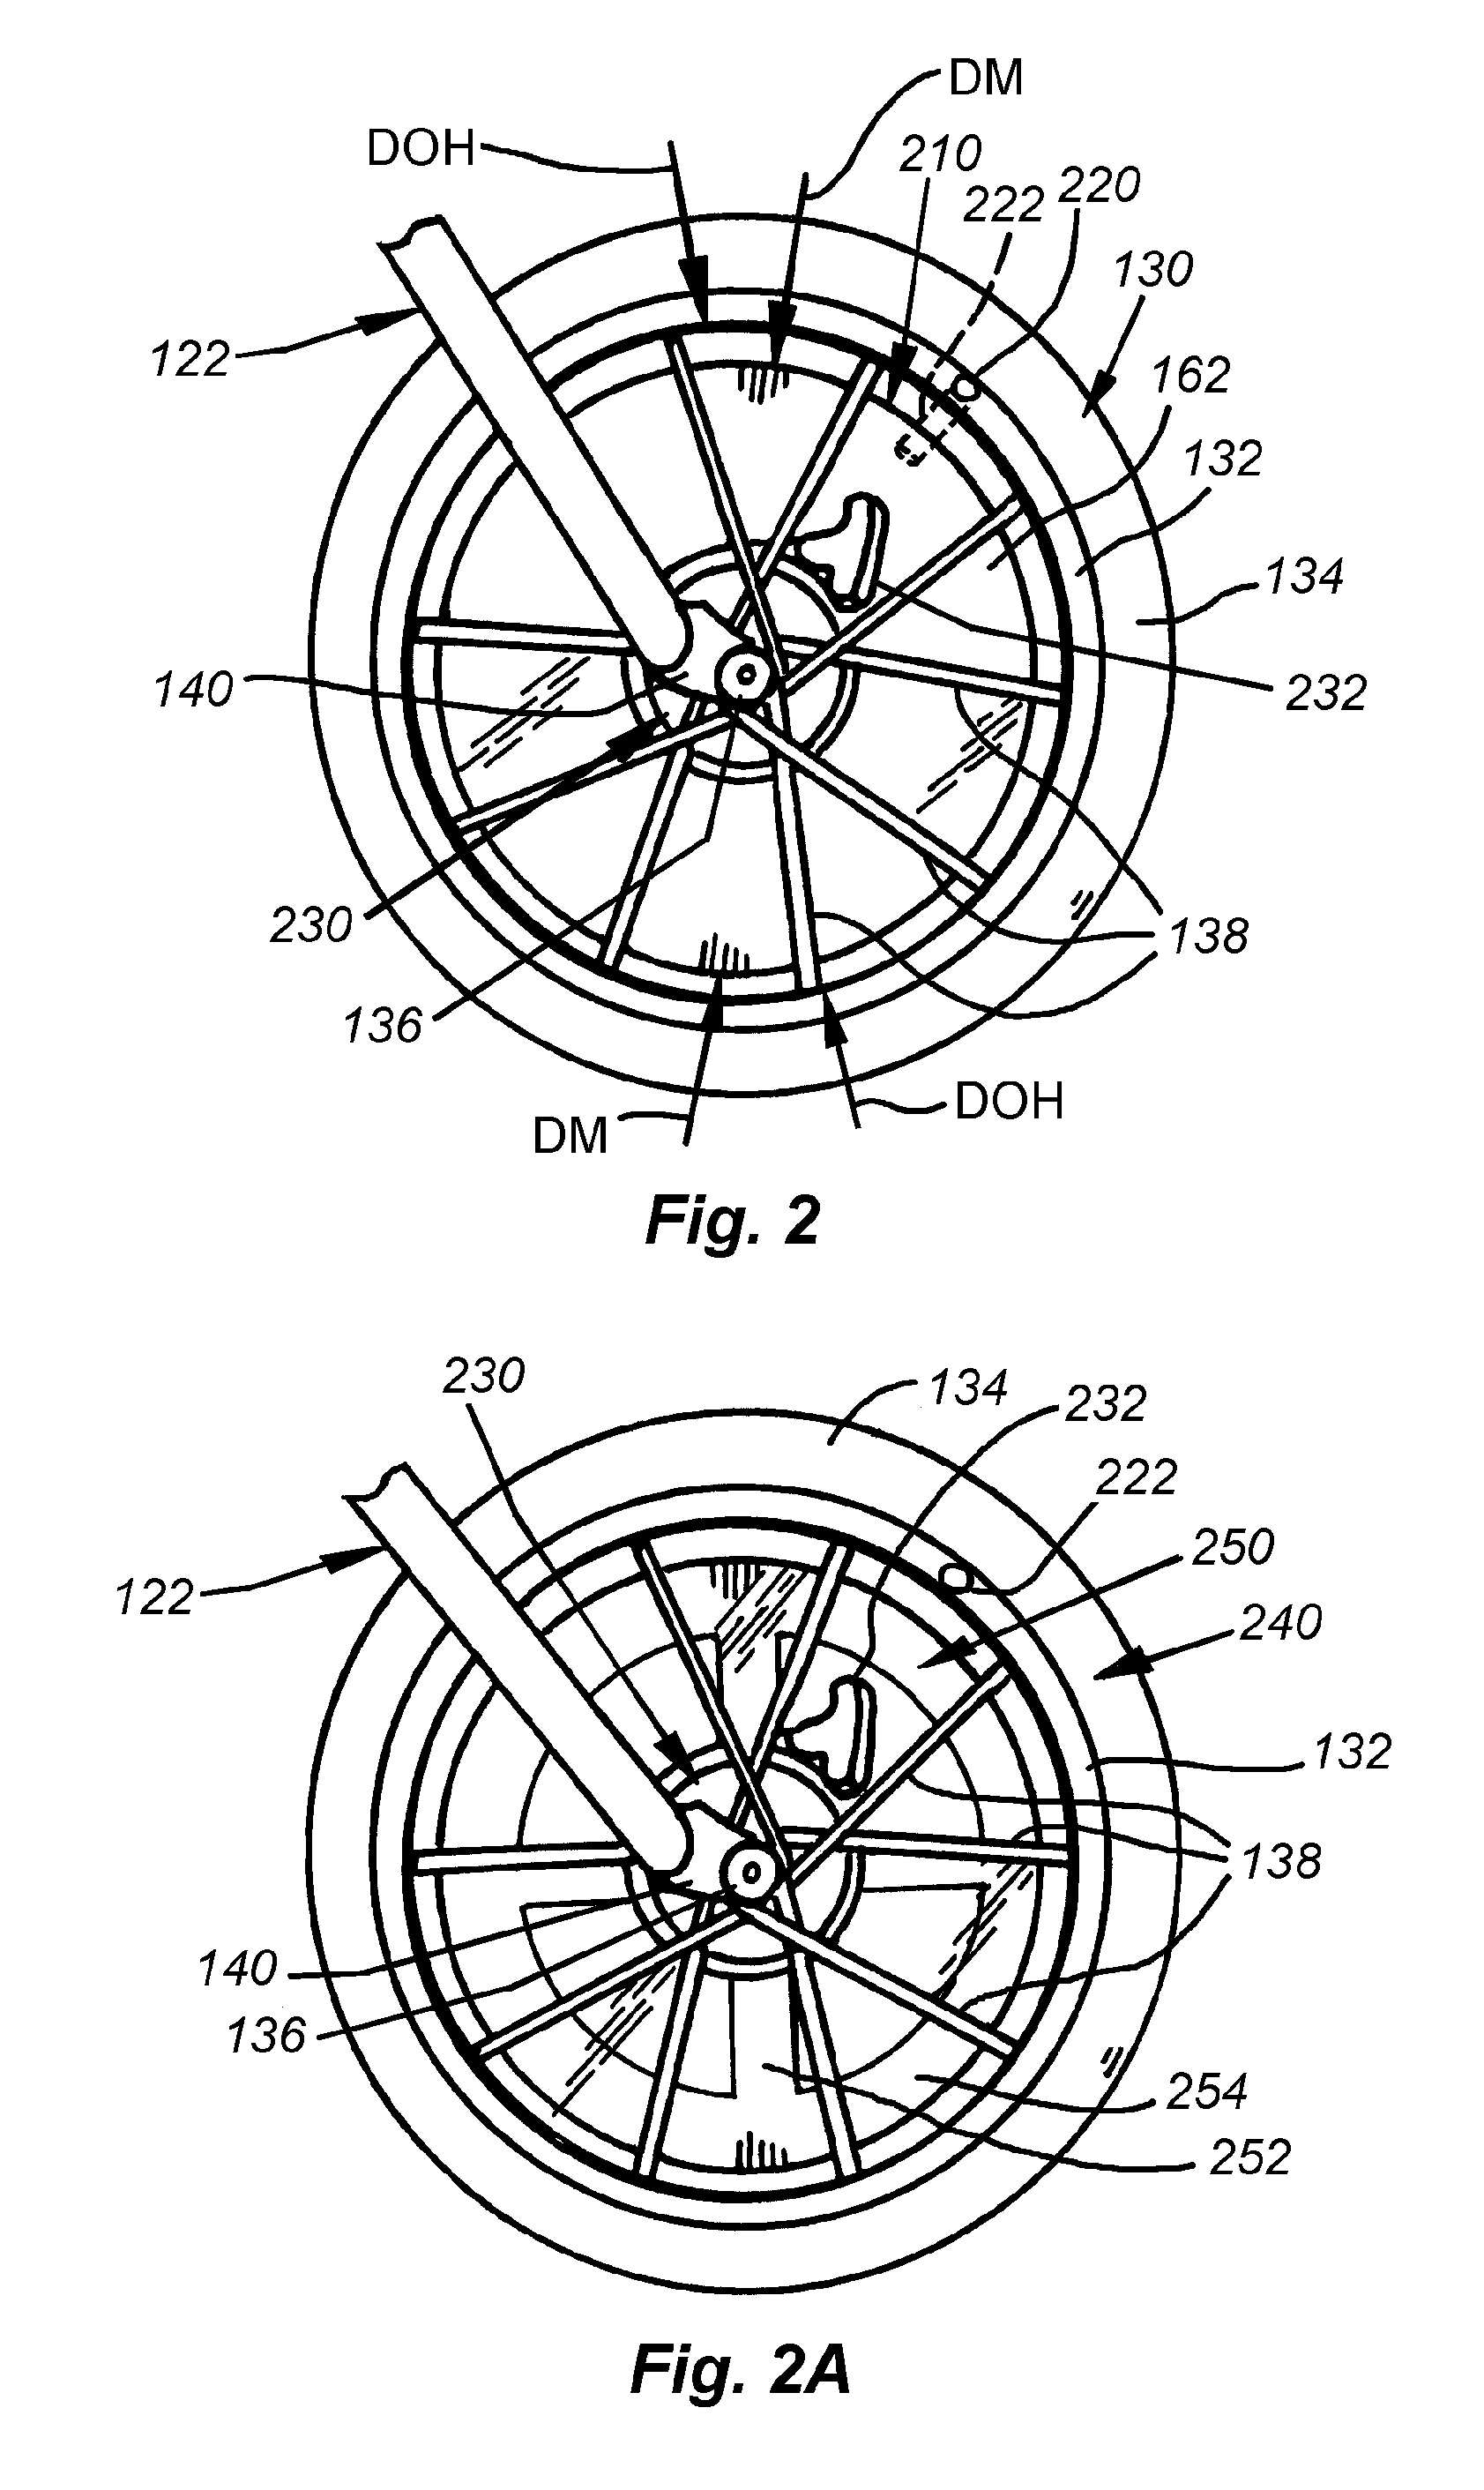 System and method for providing gyroscopic stabilization to a wheeled vehicle